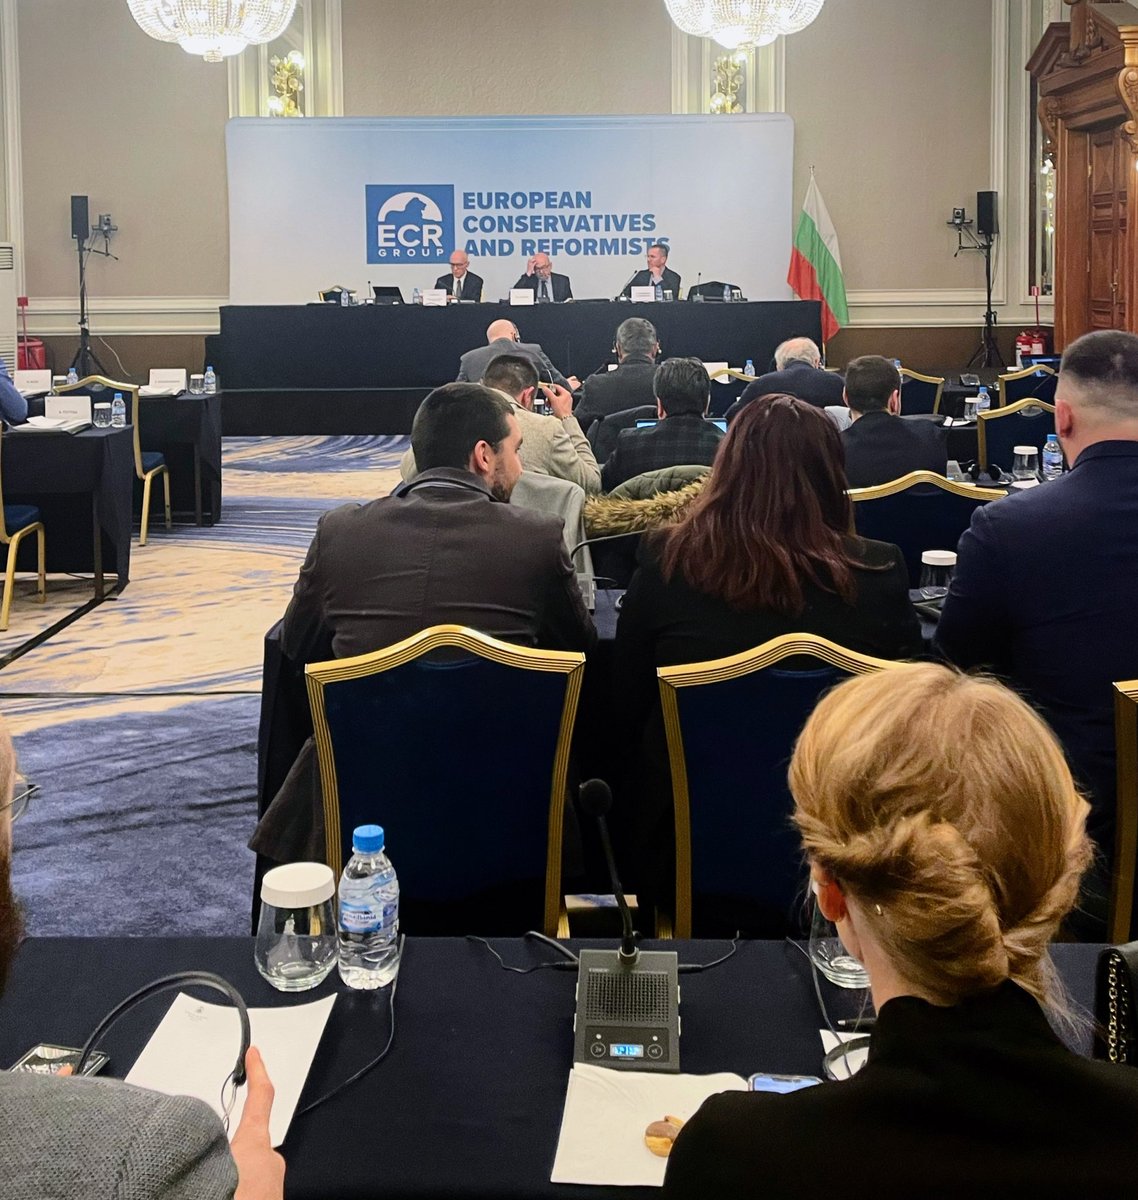 The ECR Group is gathering in 🇧🇬 #Sofia this week to discuss topics of timely importance for our continent.

🟦 Migration & the need to secure the #EU's borders
🟦 #Russia's aggression against 🇺🇦 #Ukraine 
🟦 Protecting Europe's cultural capital
⏭ The future of Europe #ResetEU